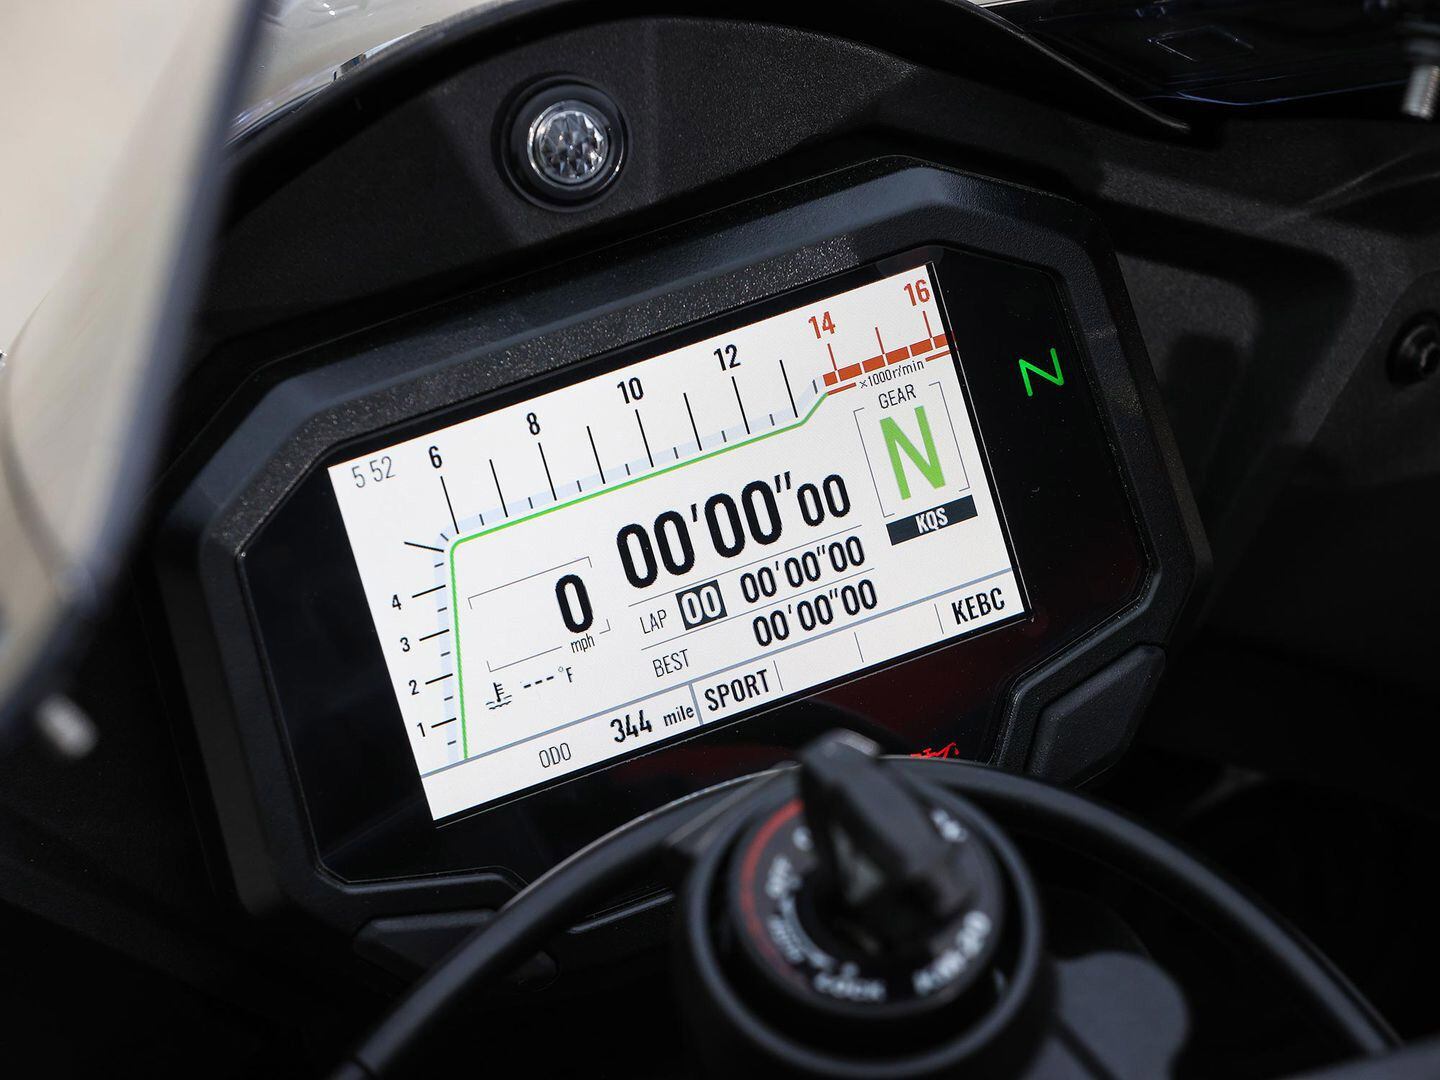 The TFT dash makes it simple to adjust the ZX-10R’s various settings.